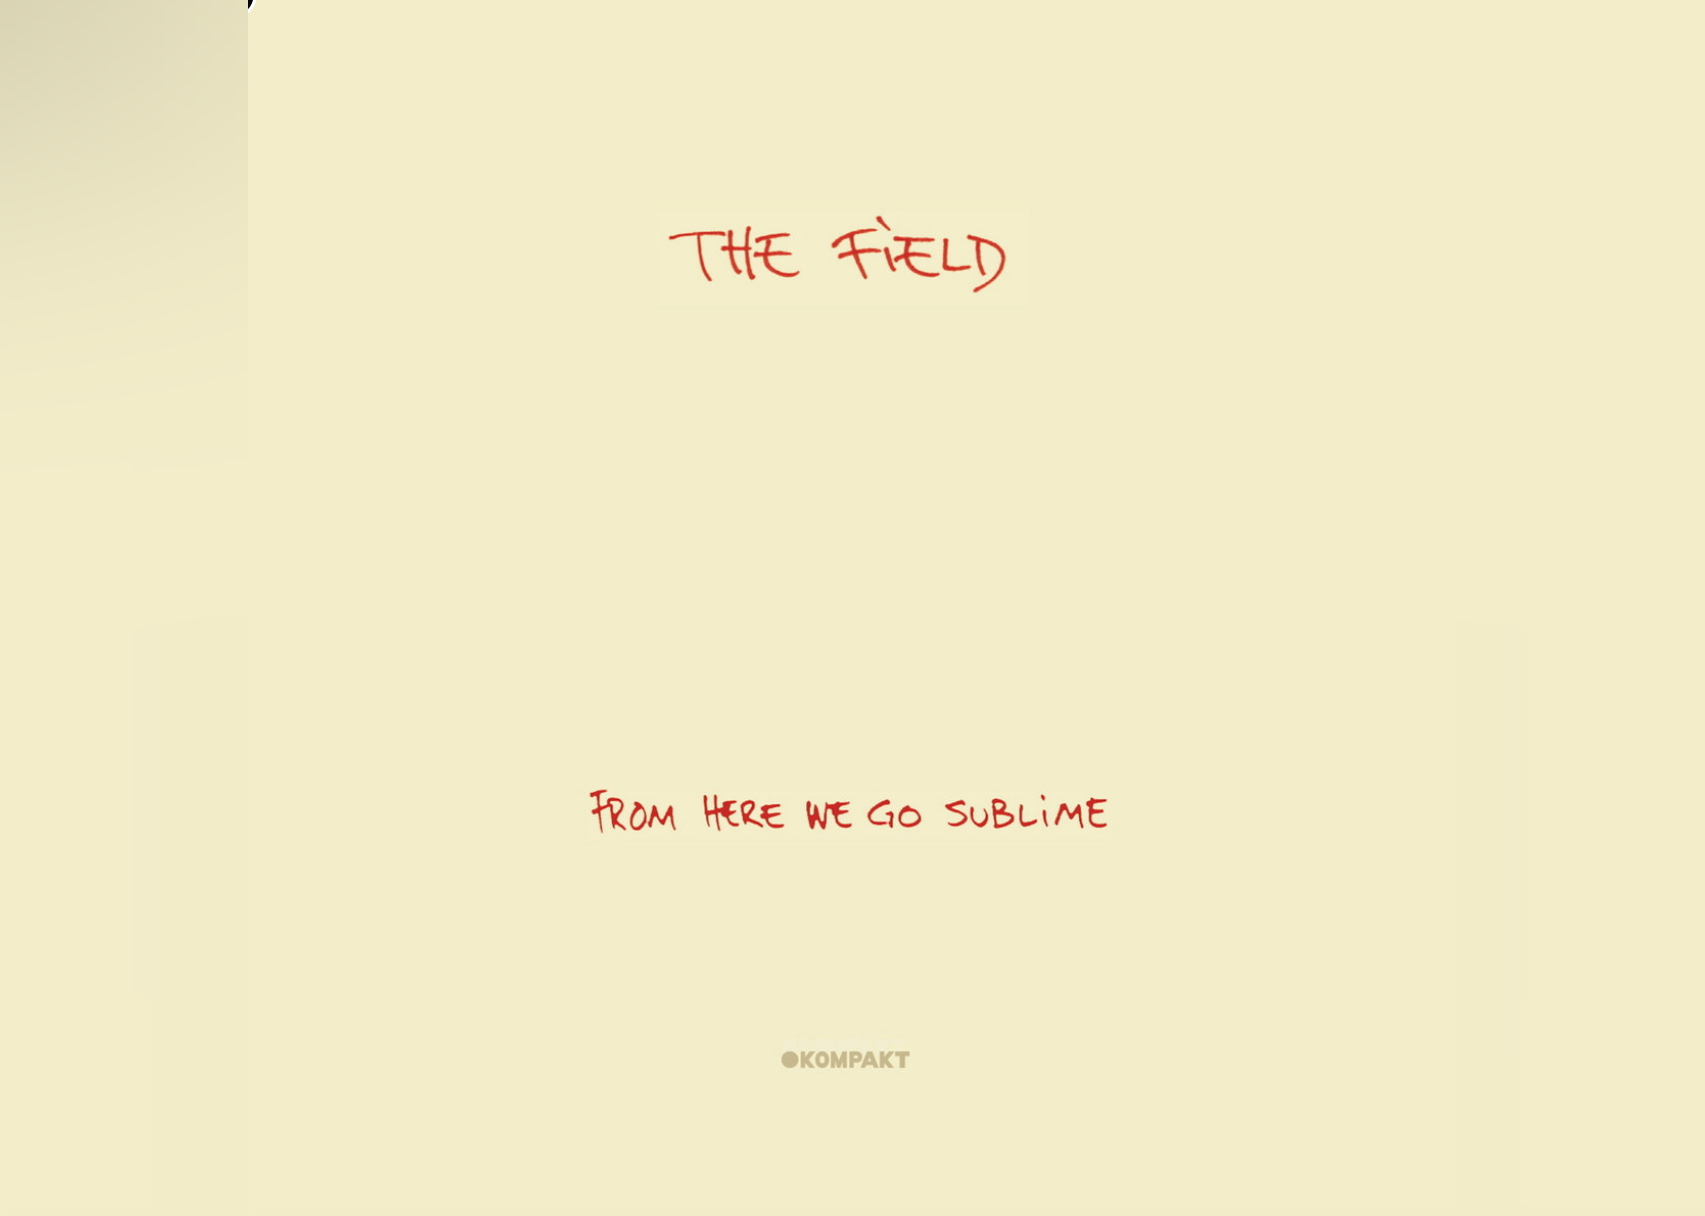 A plain cream colored album cover with the name in red.